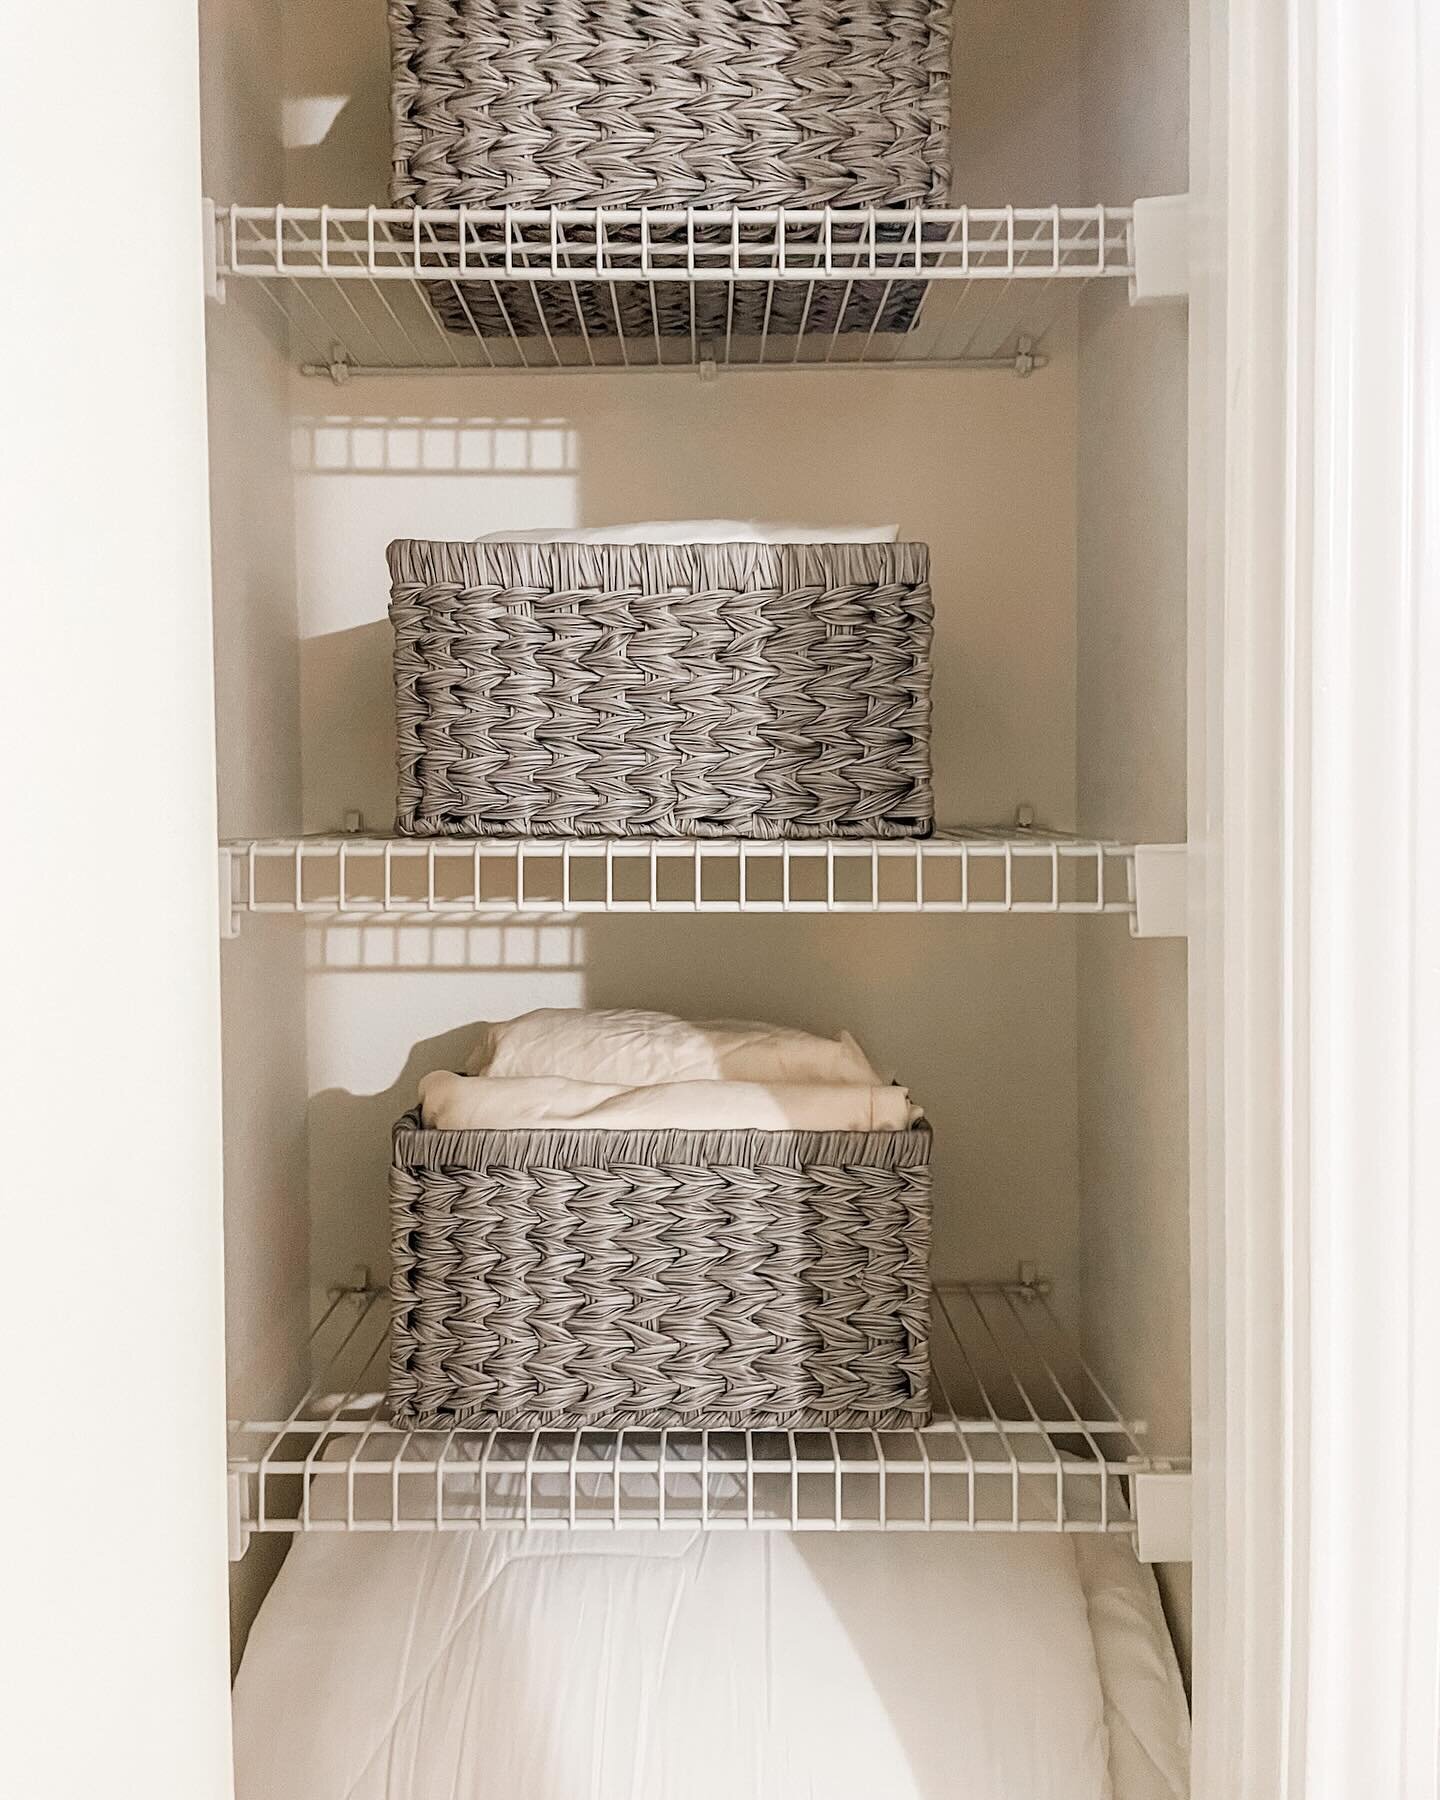 Most people think their linen closet can&rsquo;t stay tidy but I can guarantee you that when you have solid systems in place, it&rsquo;s not near as hard as you think it is! 

We&rsquo;re headed into 2024 so now&rsquo;s the absolute best time to get 